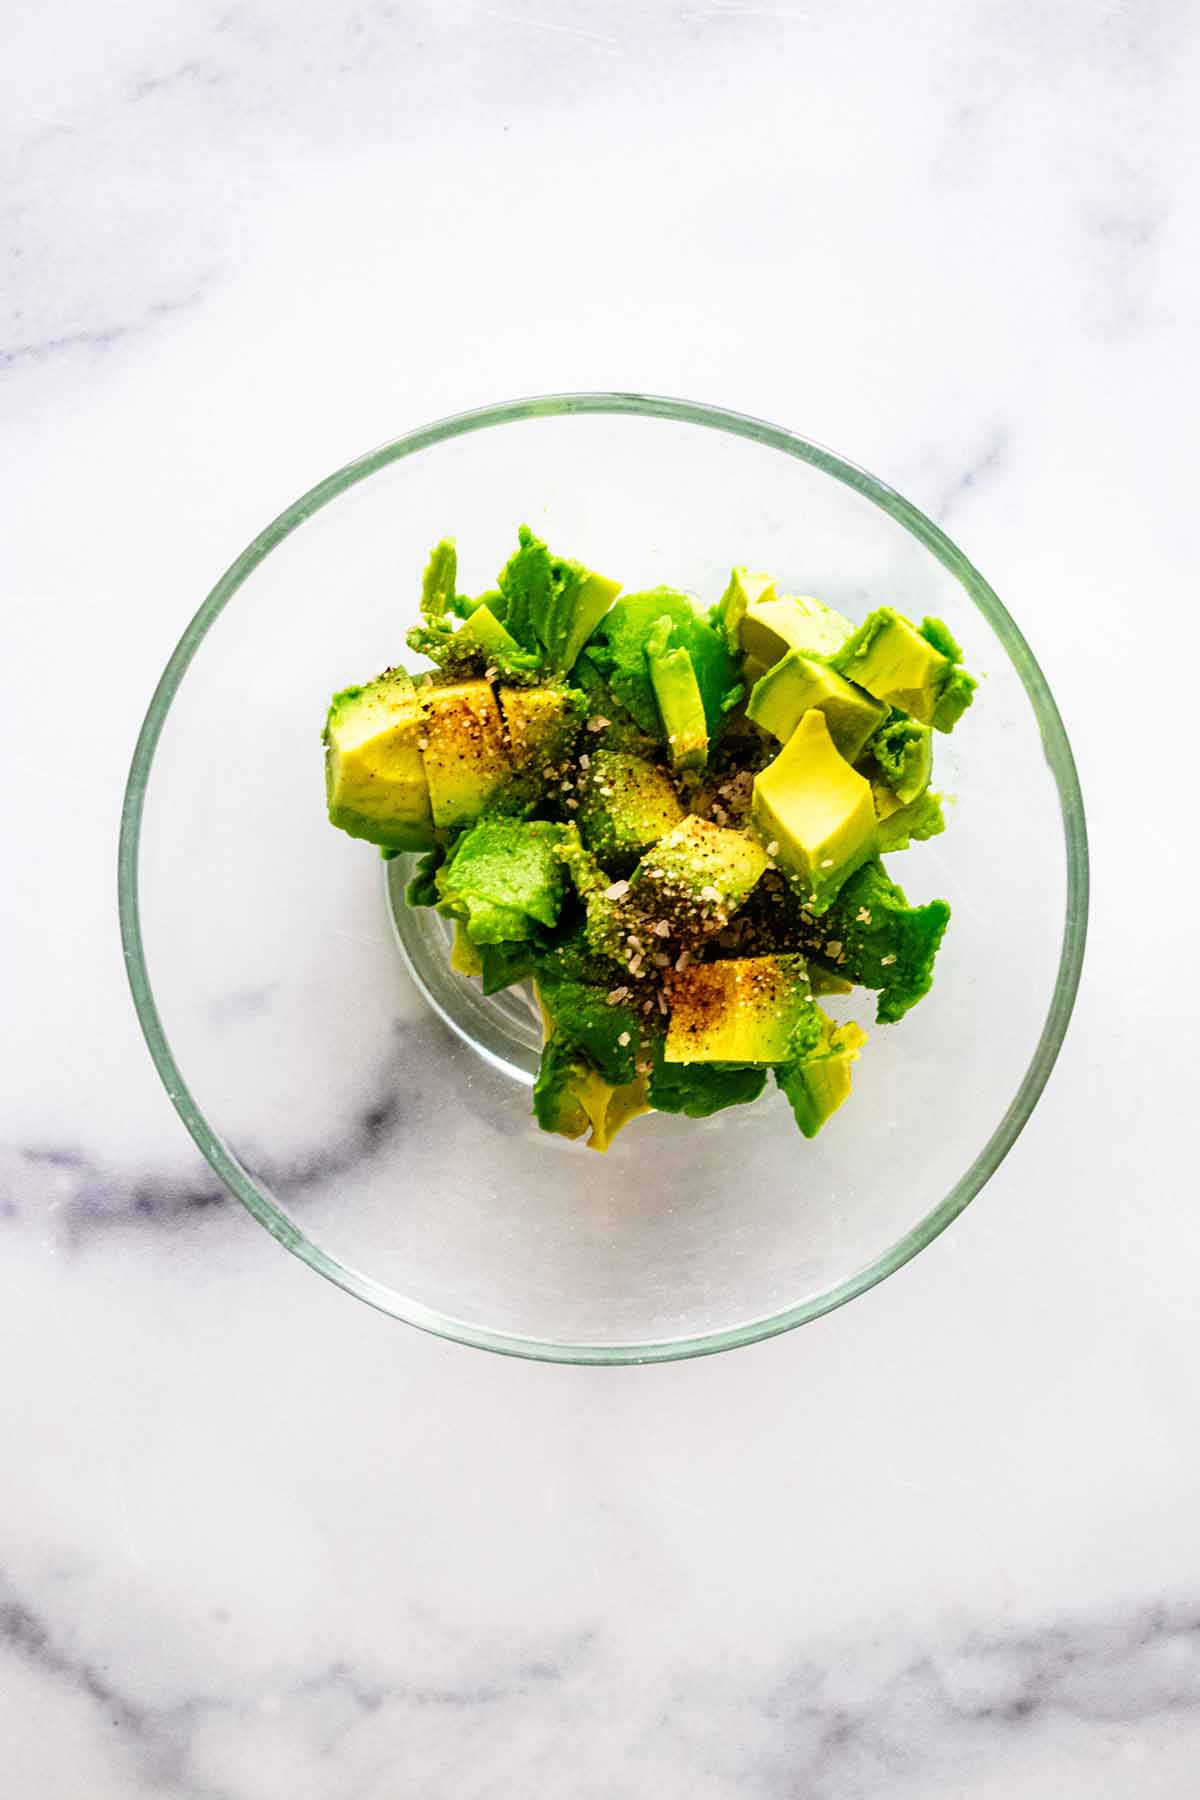 Chopped avocado in a small glass bowl